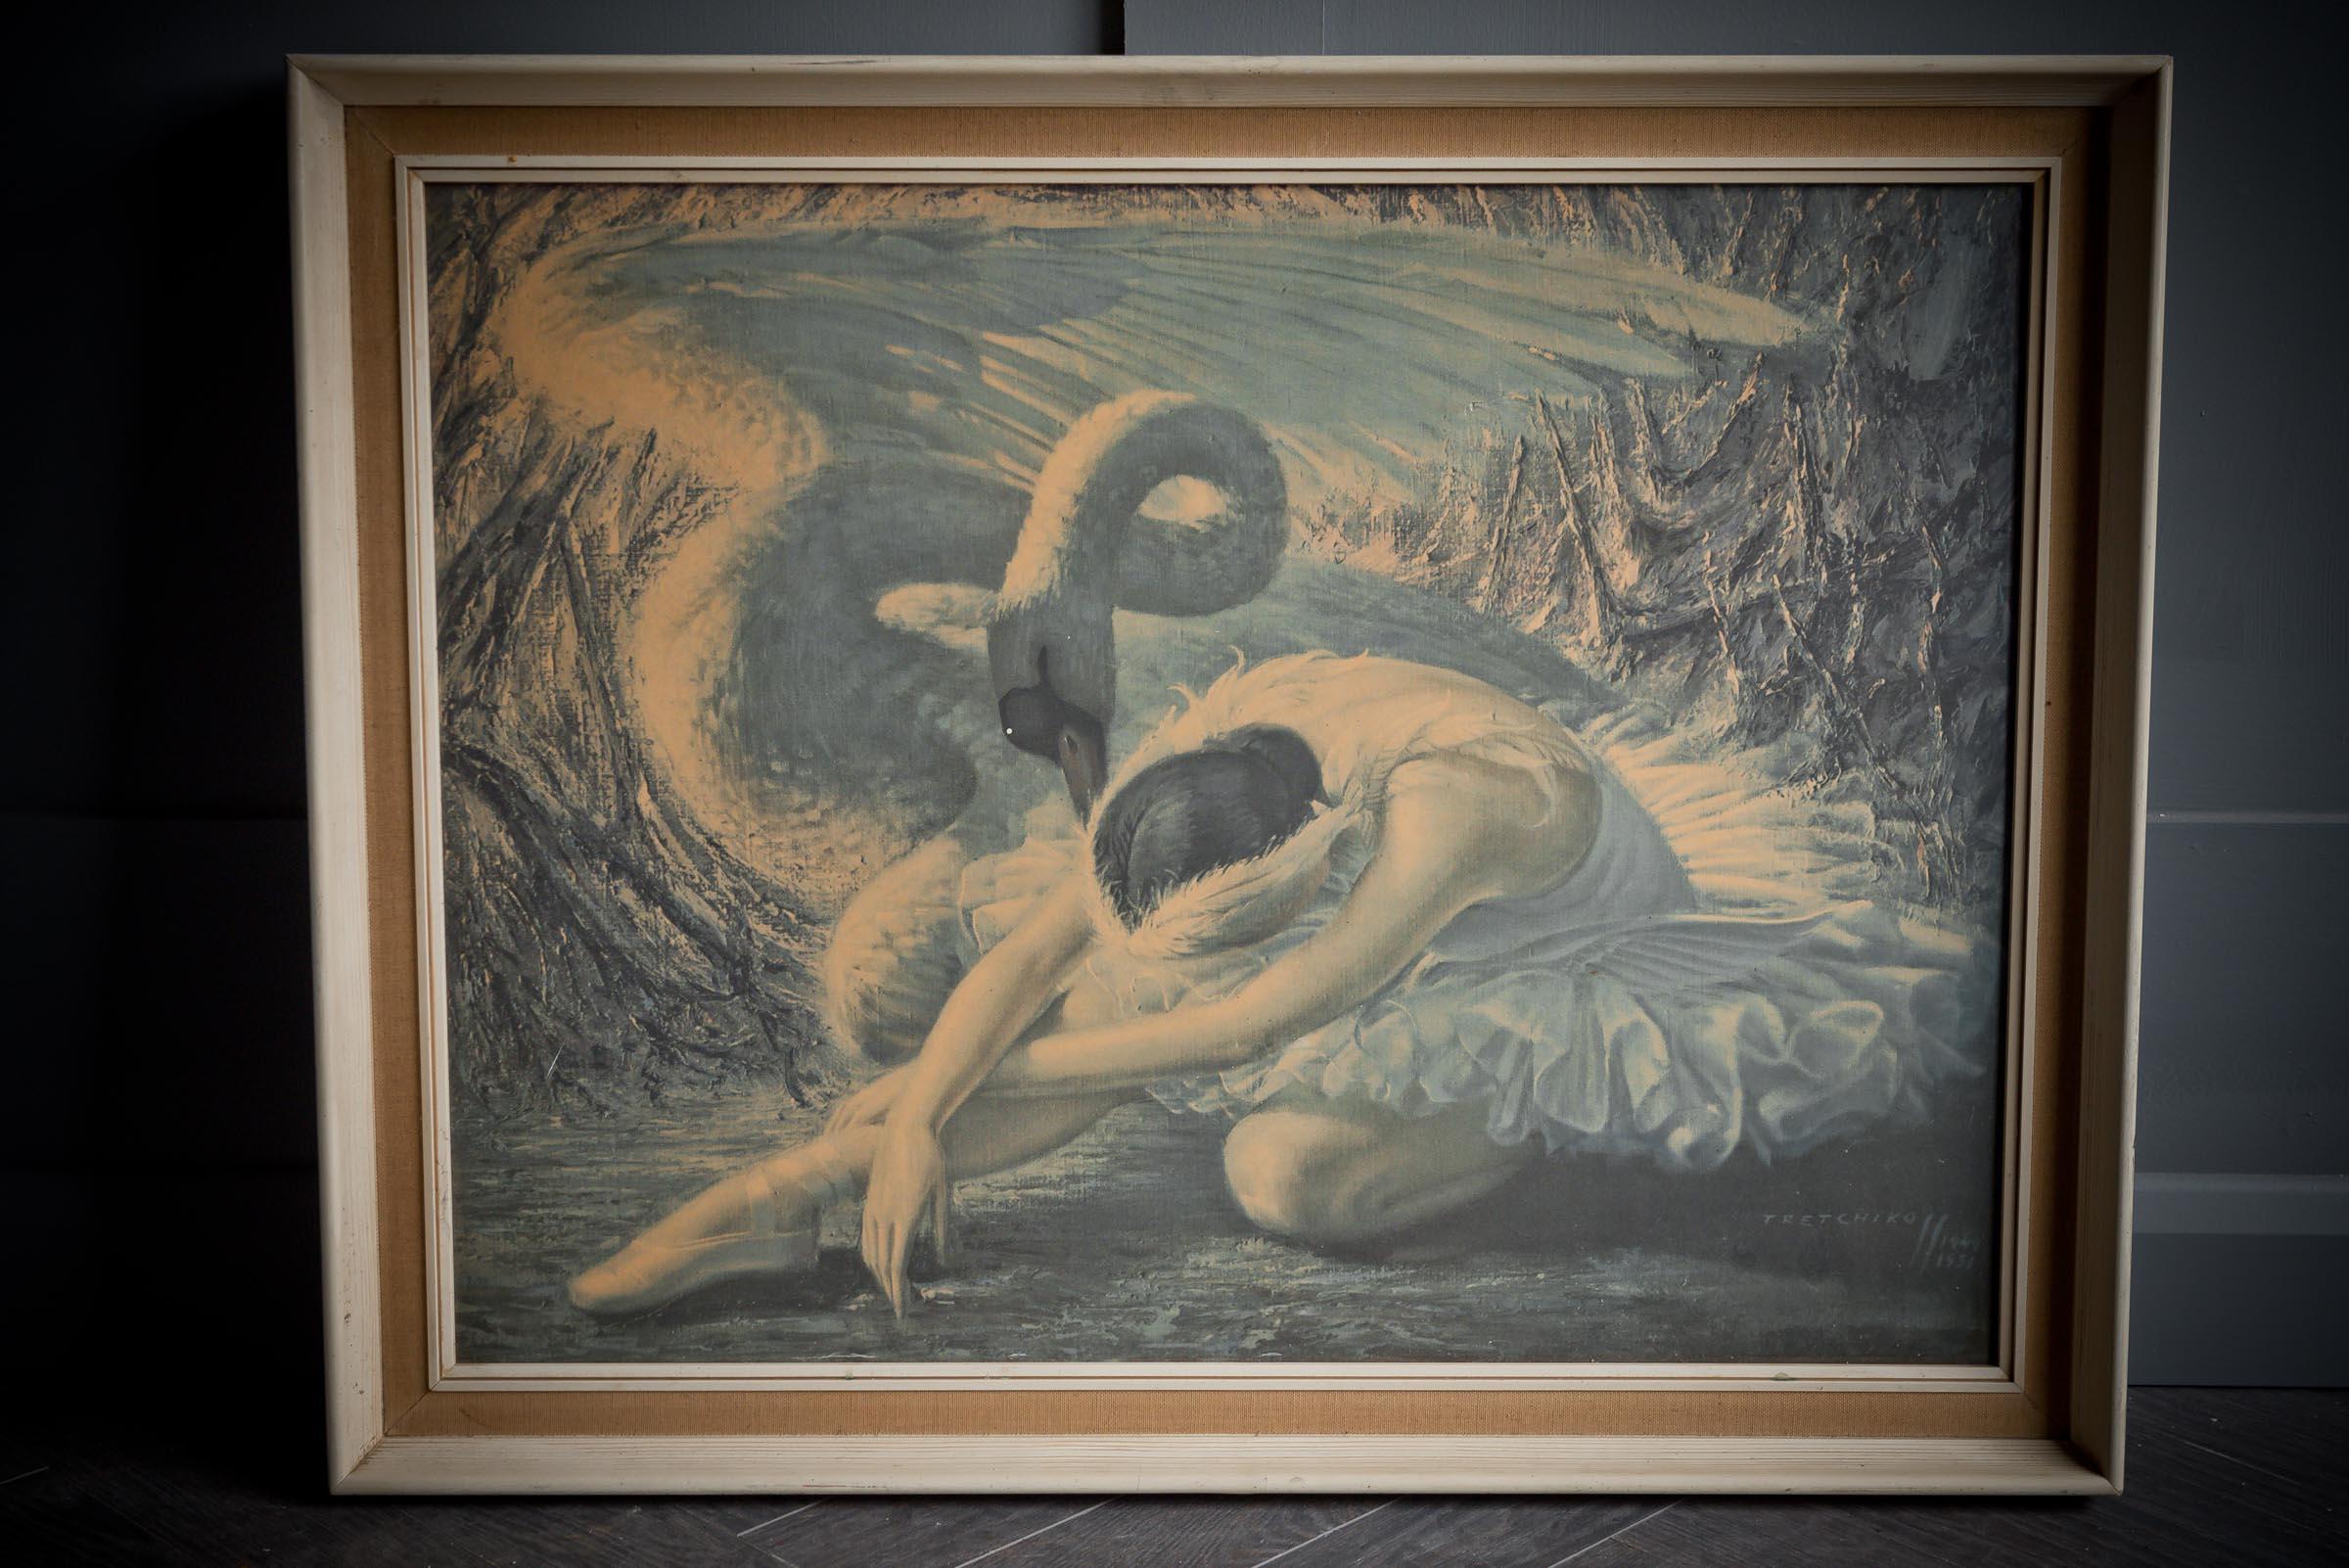 The Dying Swan by Vladimir Tretchikoff was produced in 1949 and is considered to be one of the famous artworks of movement. The work can be viewed now at Private Collection The Dying Swan is an oil painting produced in 1949 by South African painter